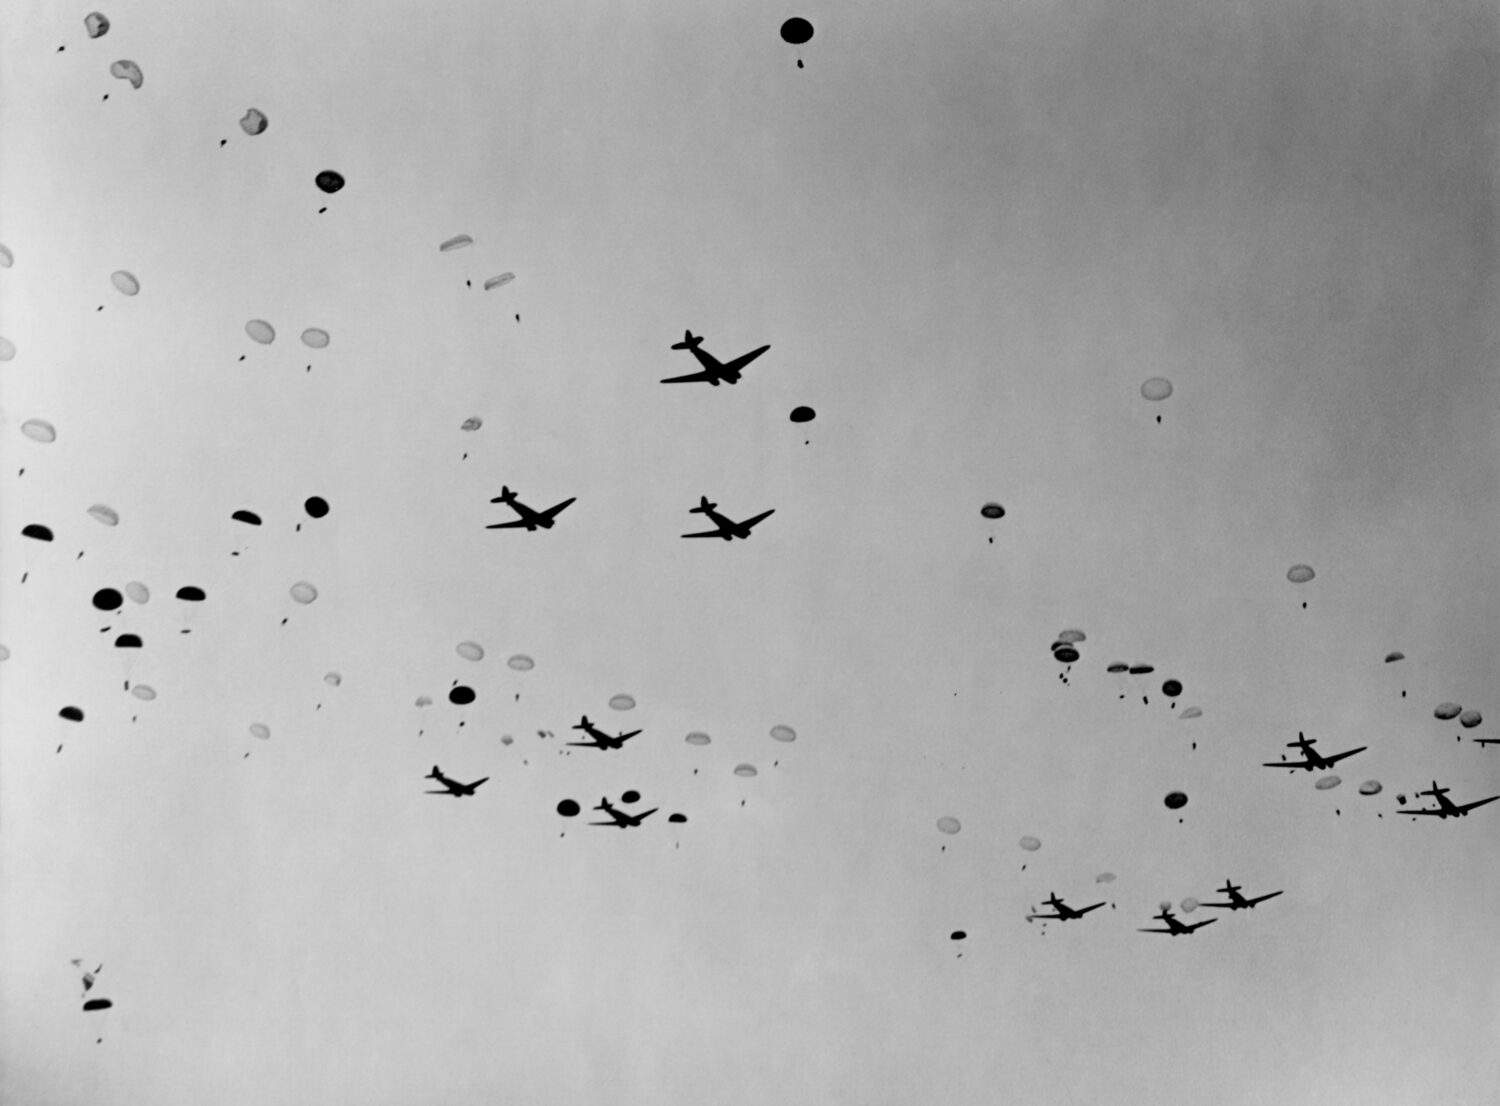 Douglas C-47s were the backbone of WW2 Airborne assault operations. Photo shows a parachute drop initiating Operation Dragoon, the Allied invasion of southern France. August 15, 1944.